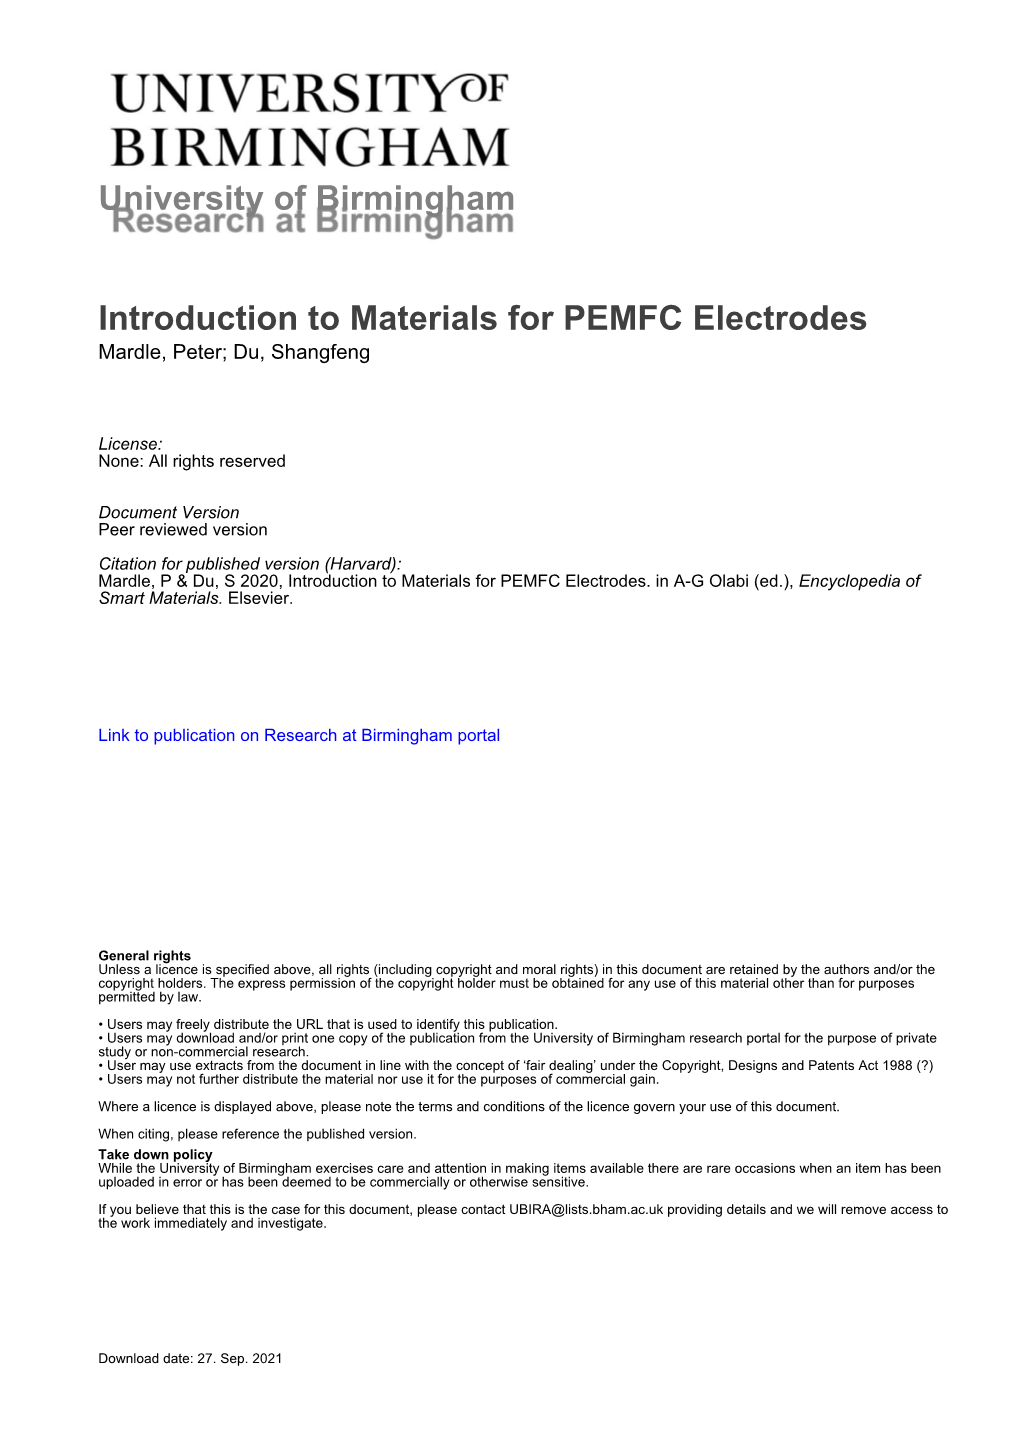 Introduction to Materials for PEMFC Electrodes Final